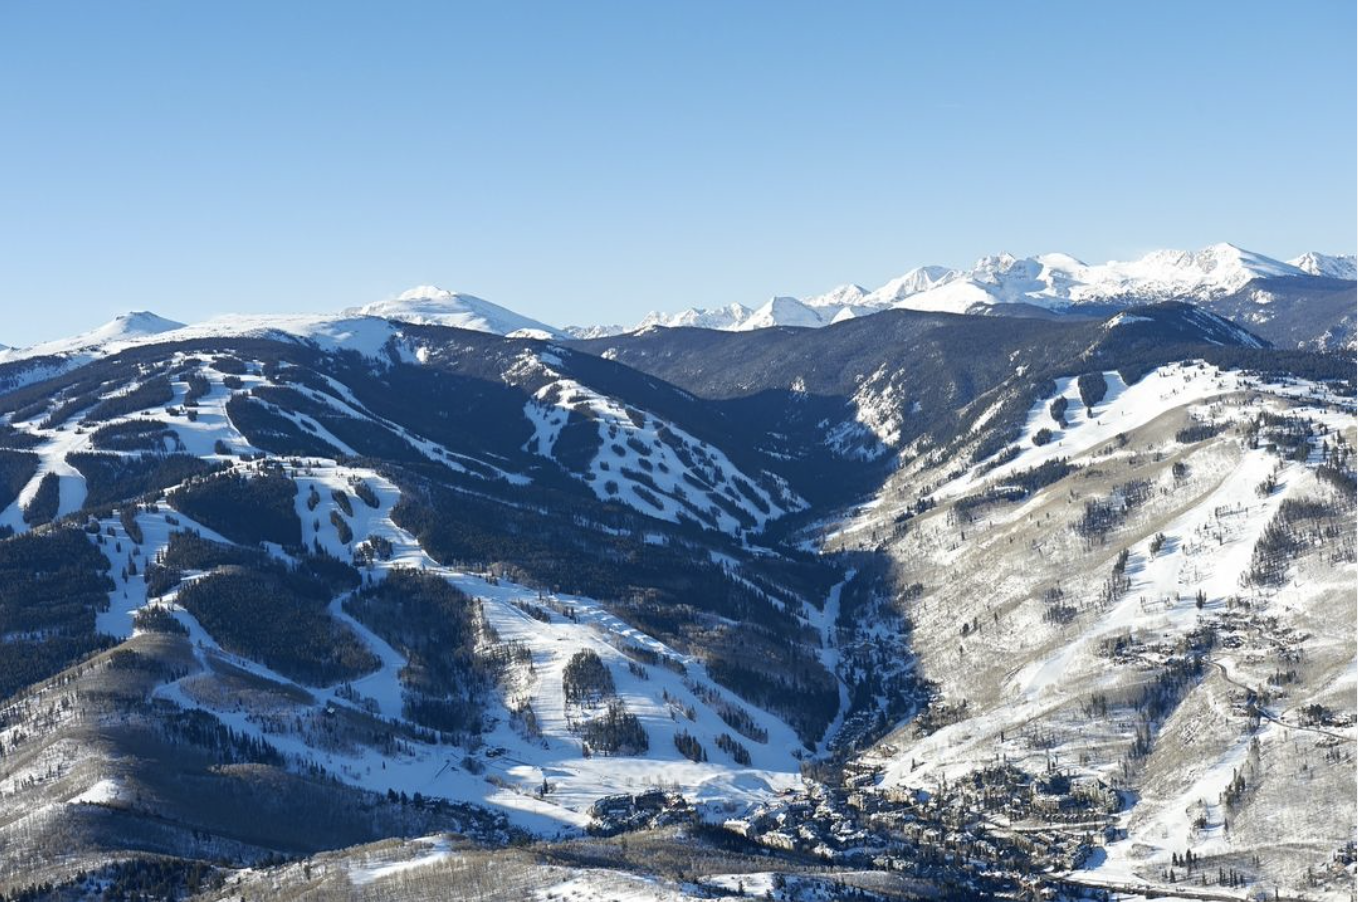 Beaver Creek To Open With 200 Acres Of Skiable Terrain On November 21